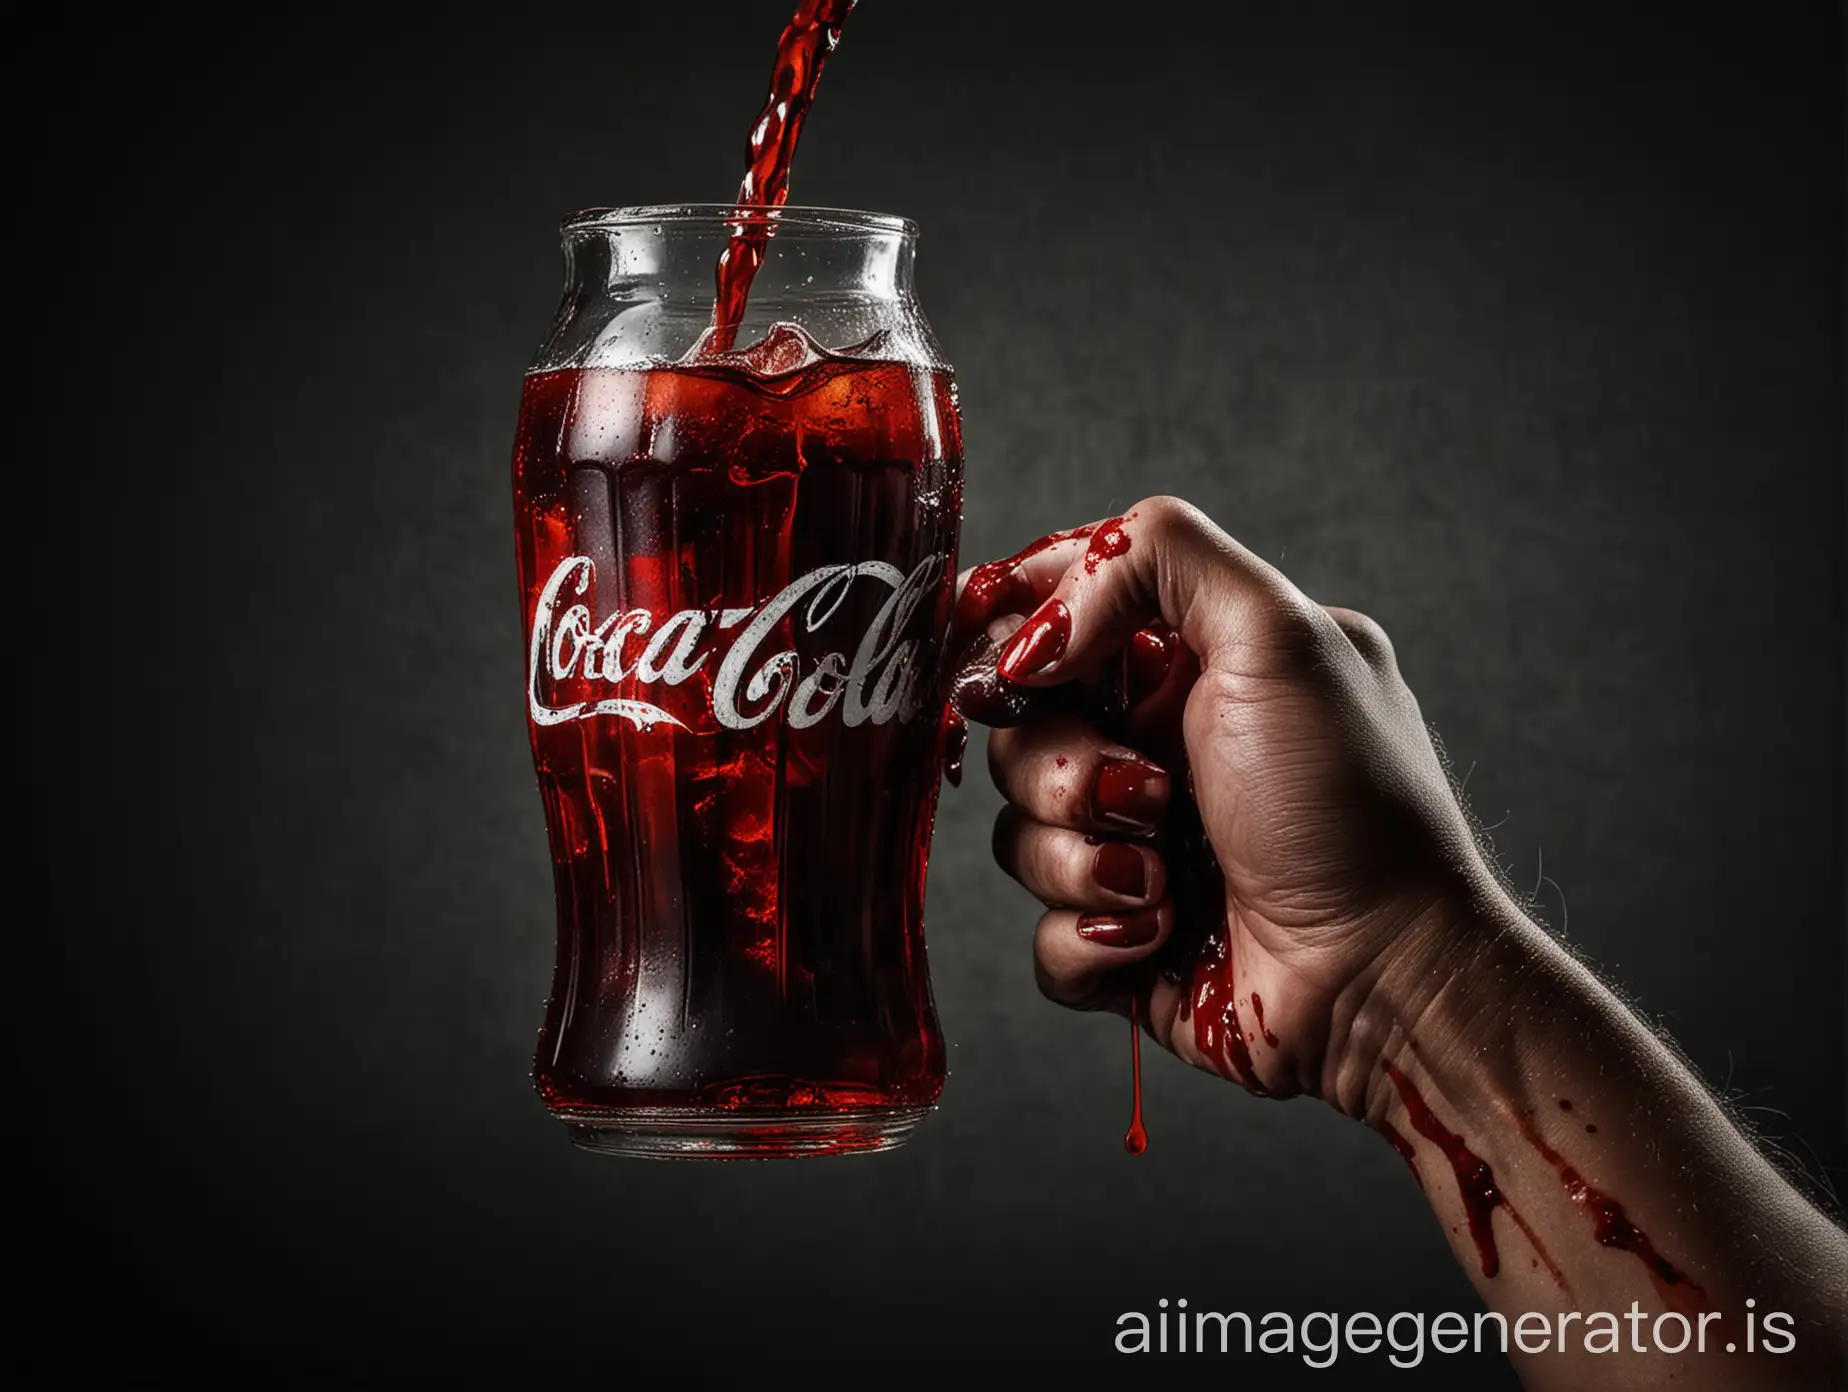 Bloody-Hand-Holding-a-Coca-Cola-in-a-Dark-Photoshoot-Setting